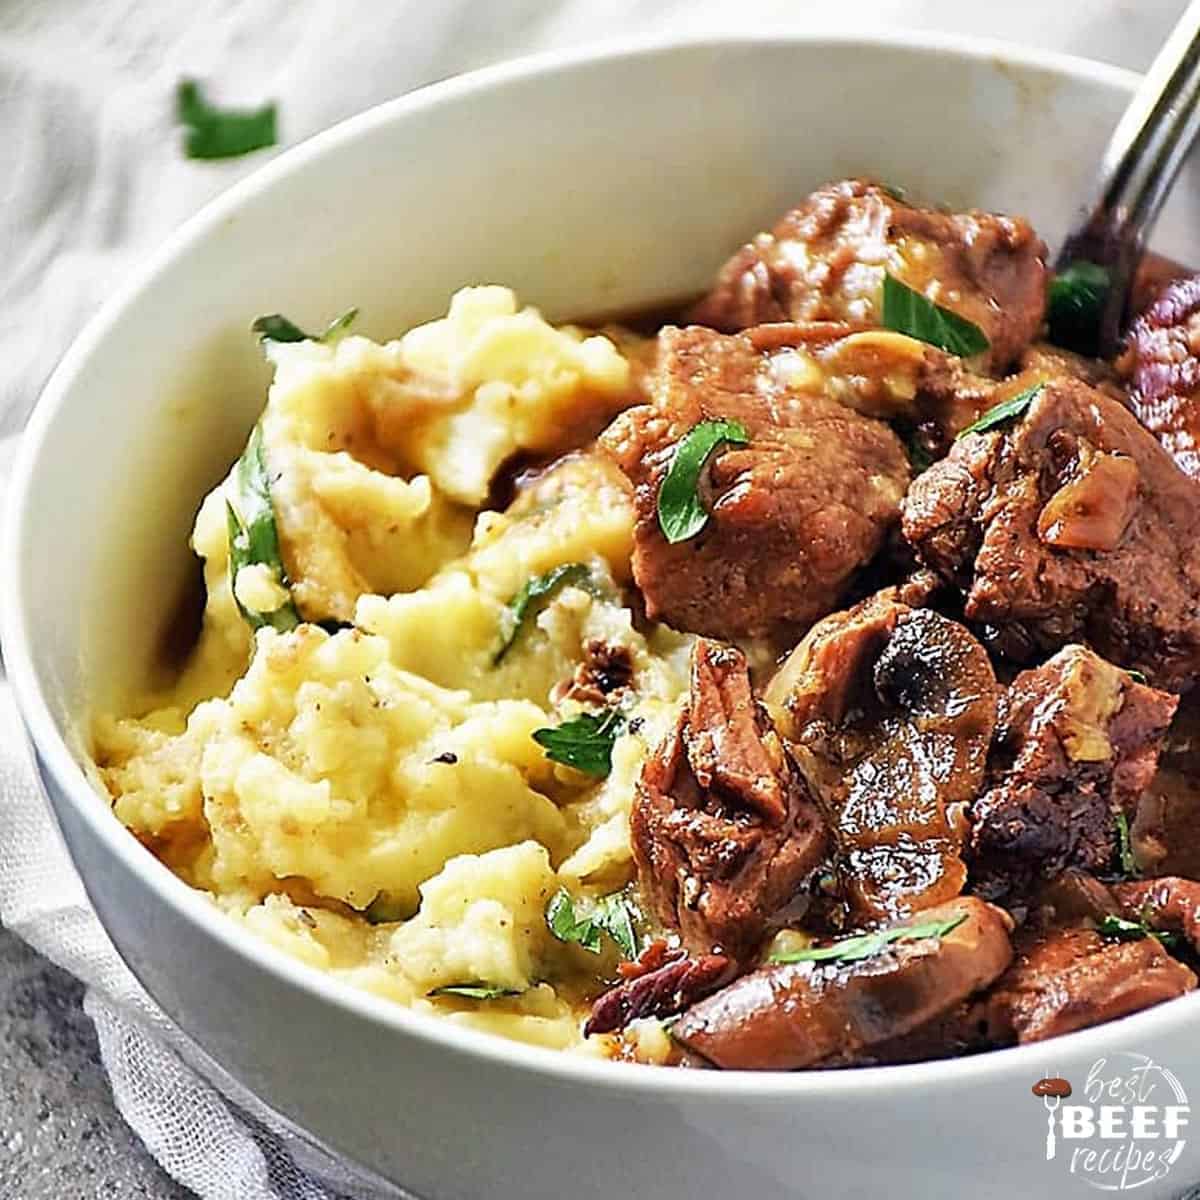 Beef tips and gravy over mashed potatoes in a white bowl